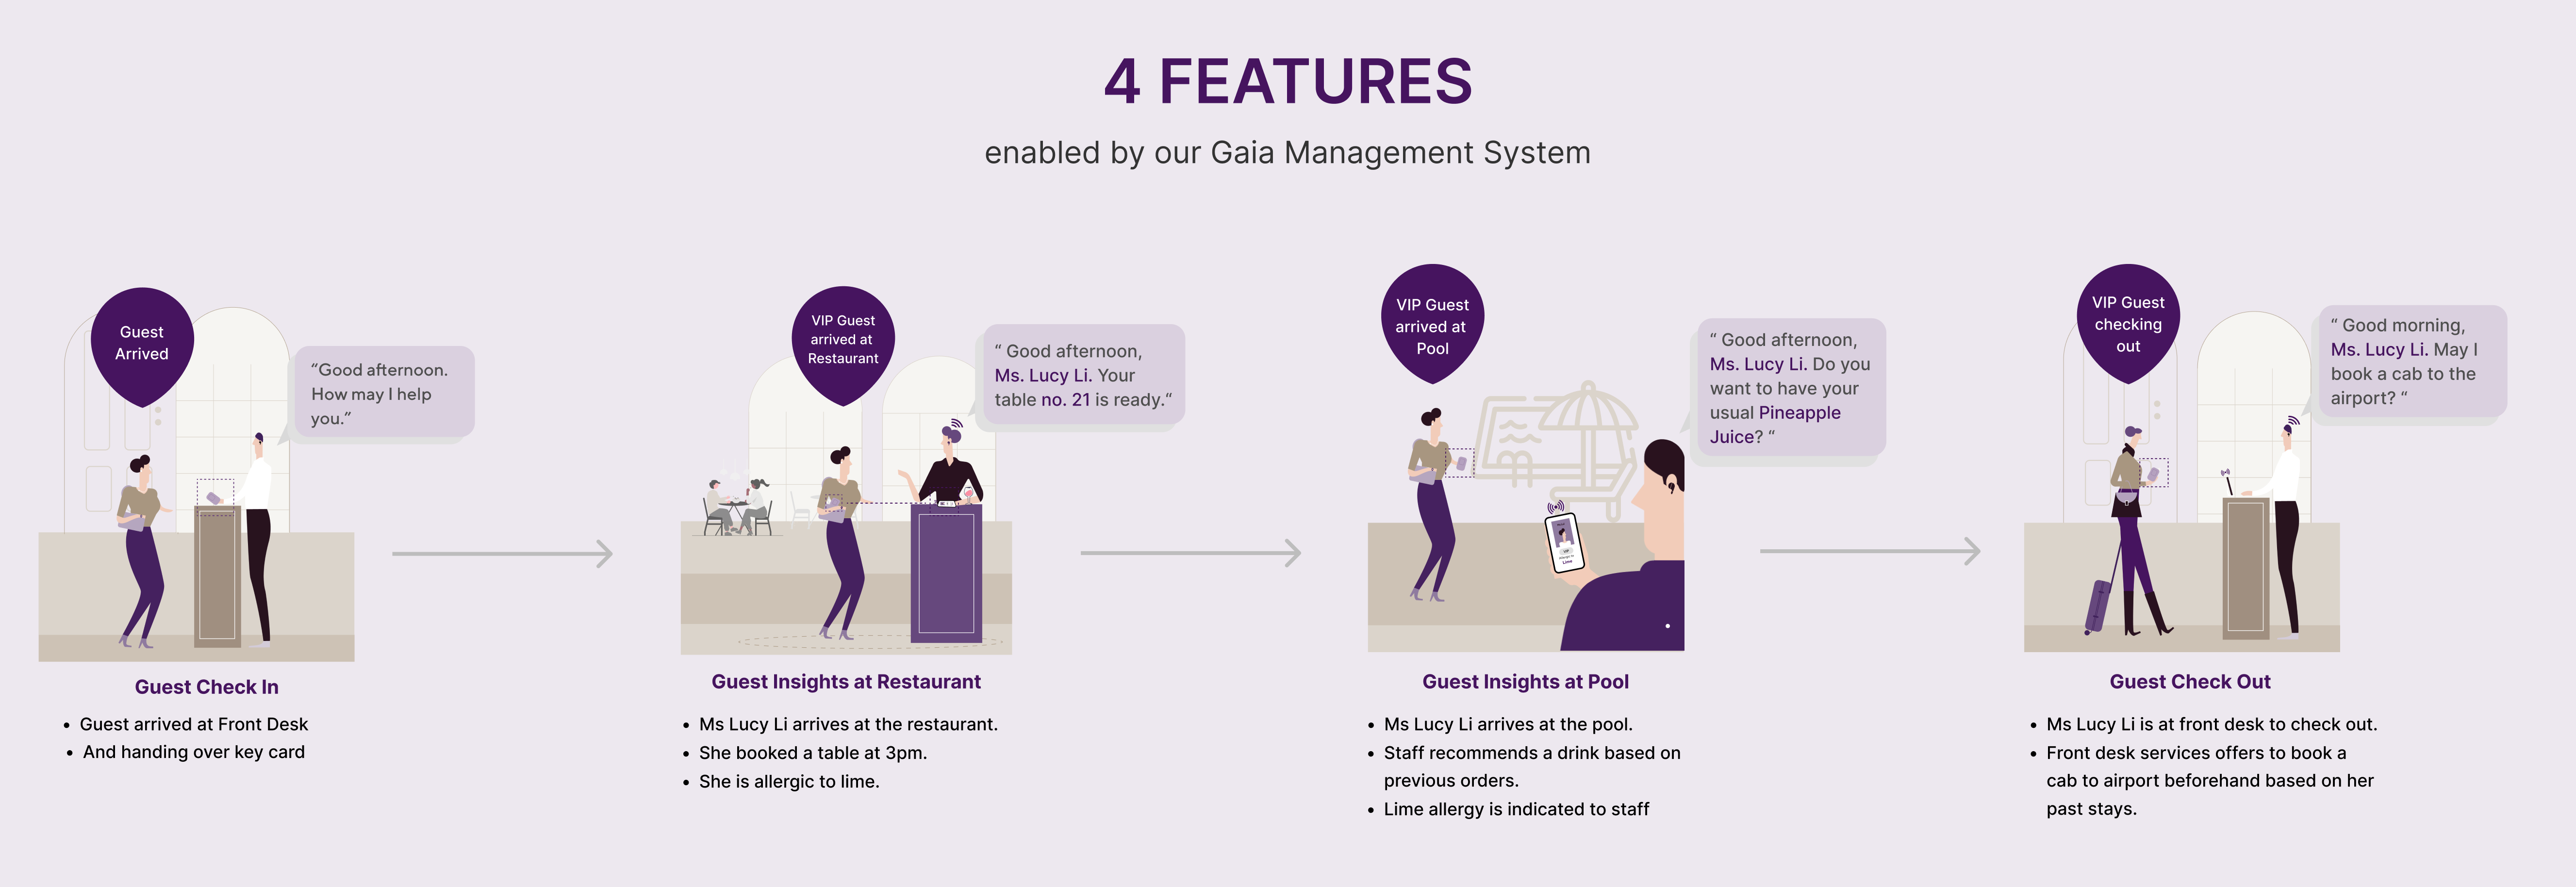 A seamless hotel user journey enabled by Gaia